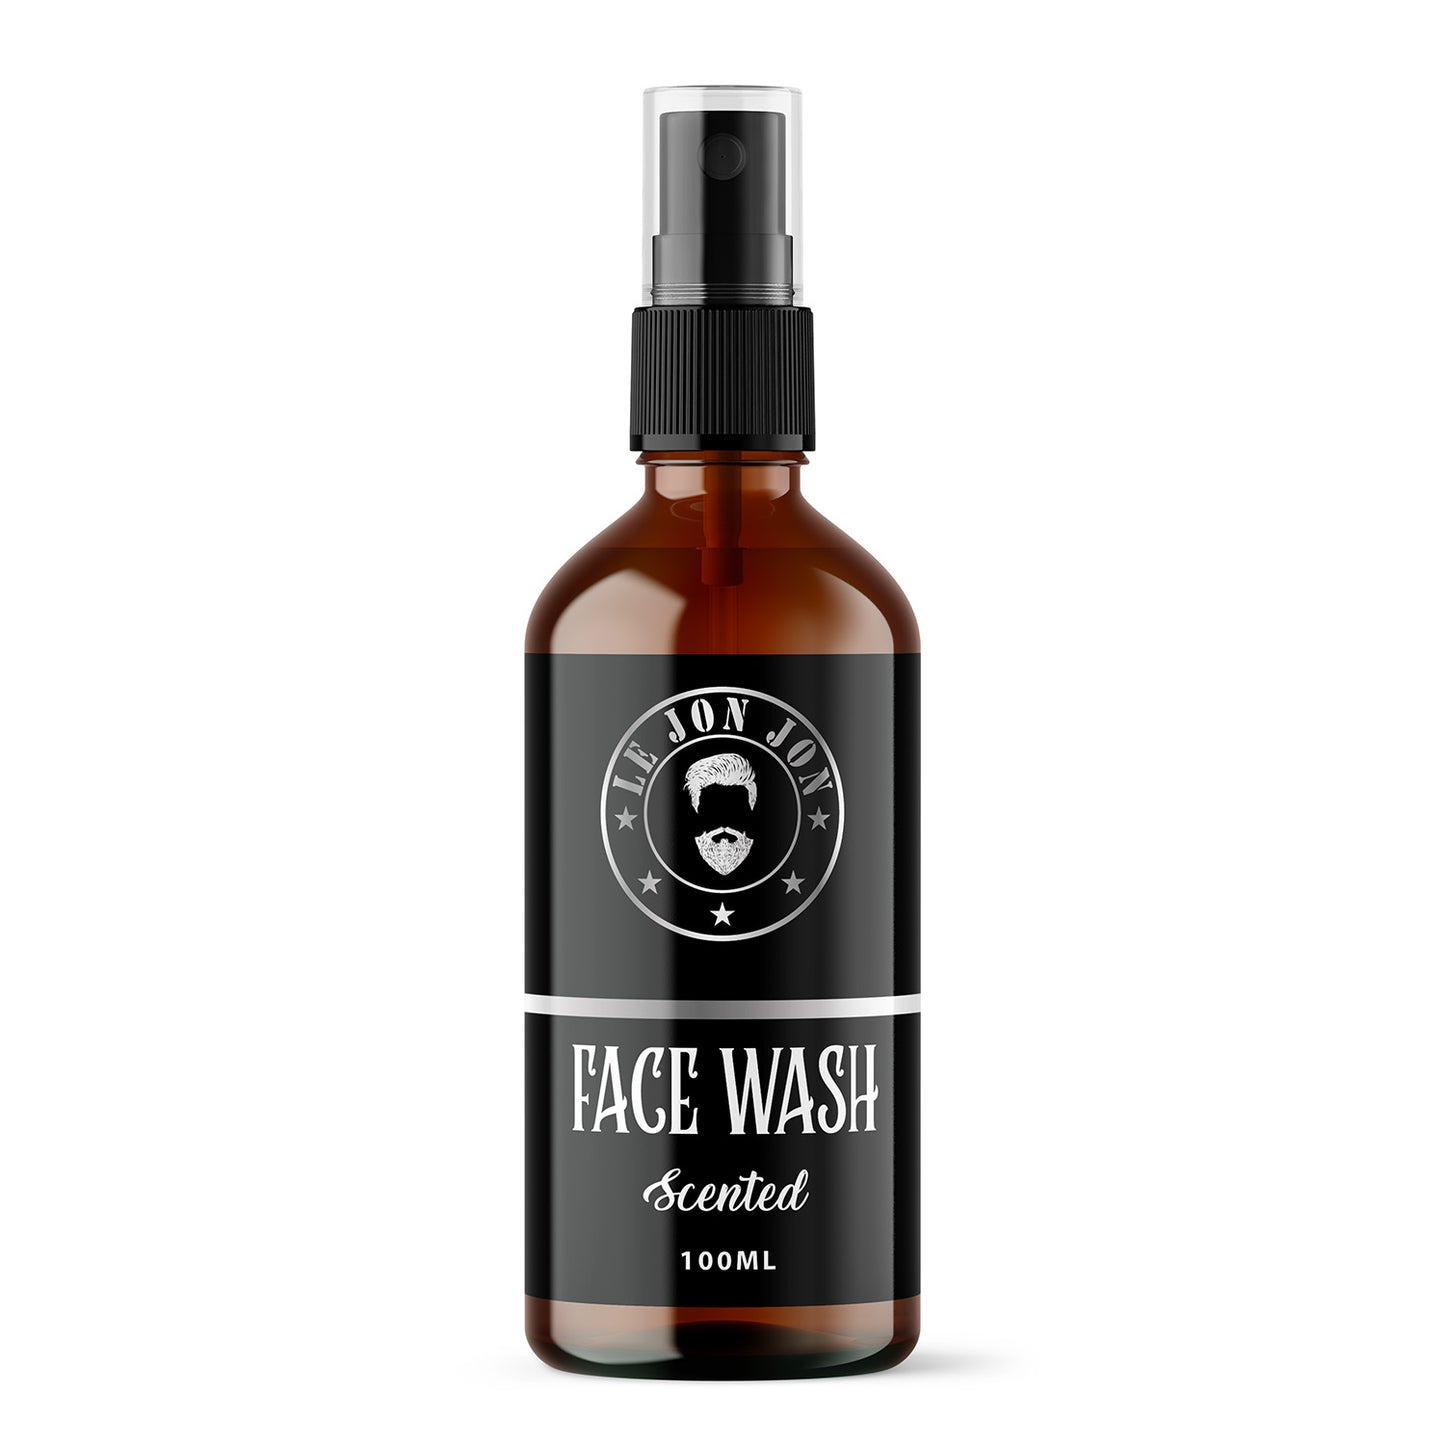 Face wash scented